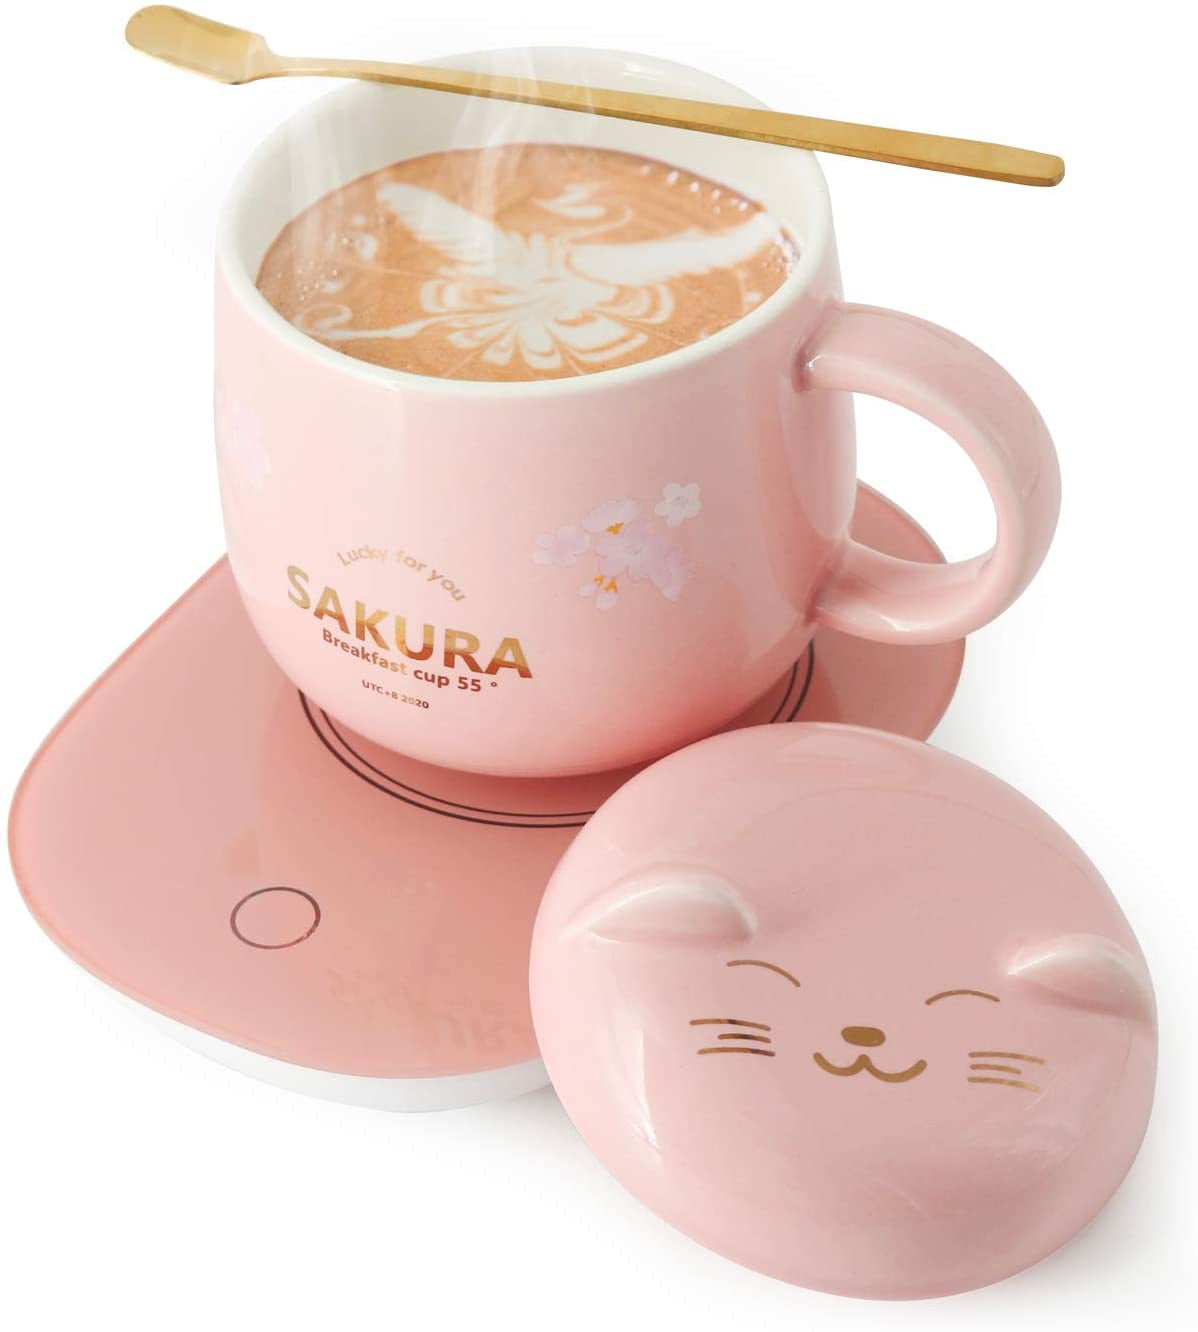 Birthday Gifts for Her Unique Gift Ideas for Women Mum Teacher Birthday Christmas Valentines Days Yoobala 55°C intelligent Porcelain Coffee Mug Set Ceramic Cup with Warmer Plate & Lid & Gift Box 